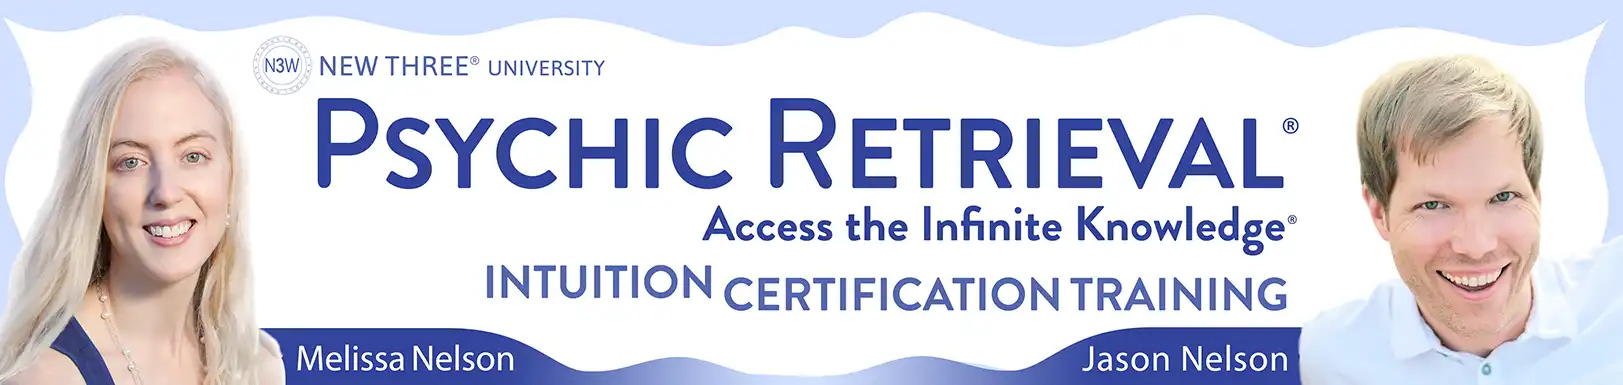 psychic retrieval intuition training